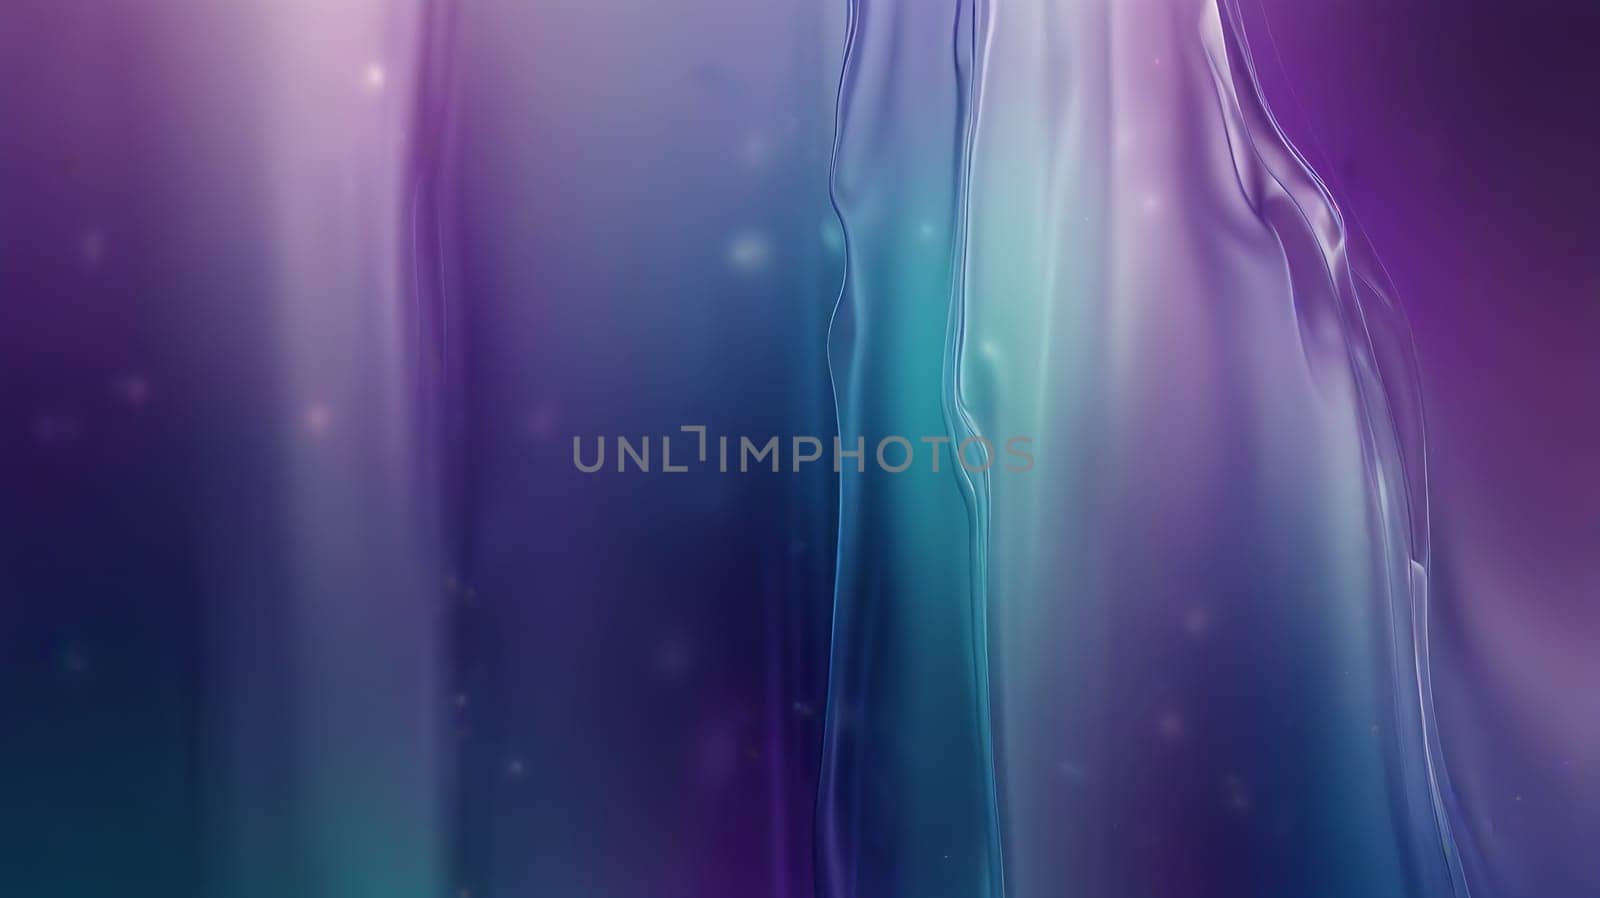 Abstract holographic iridescent purple and turquoise liquid metal texture background. Colorful abstract gleaming fluid material.